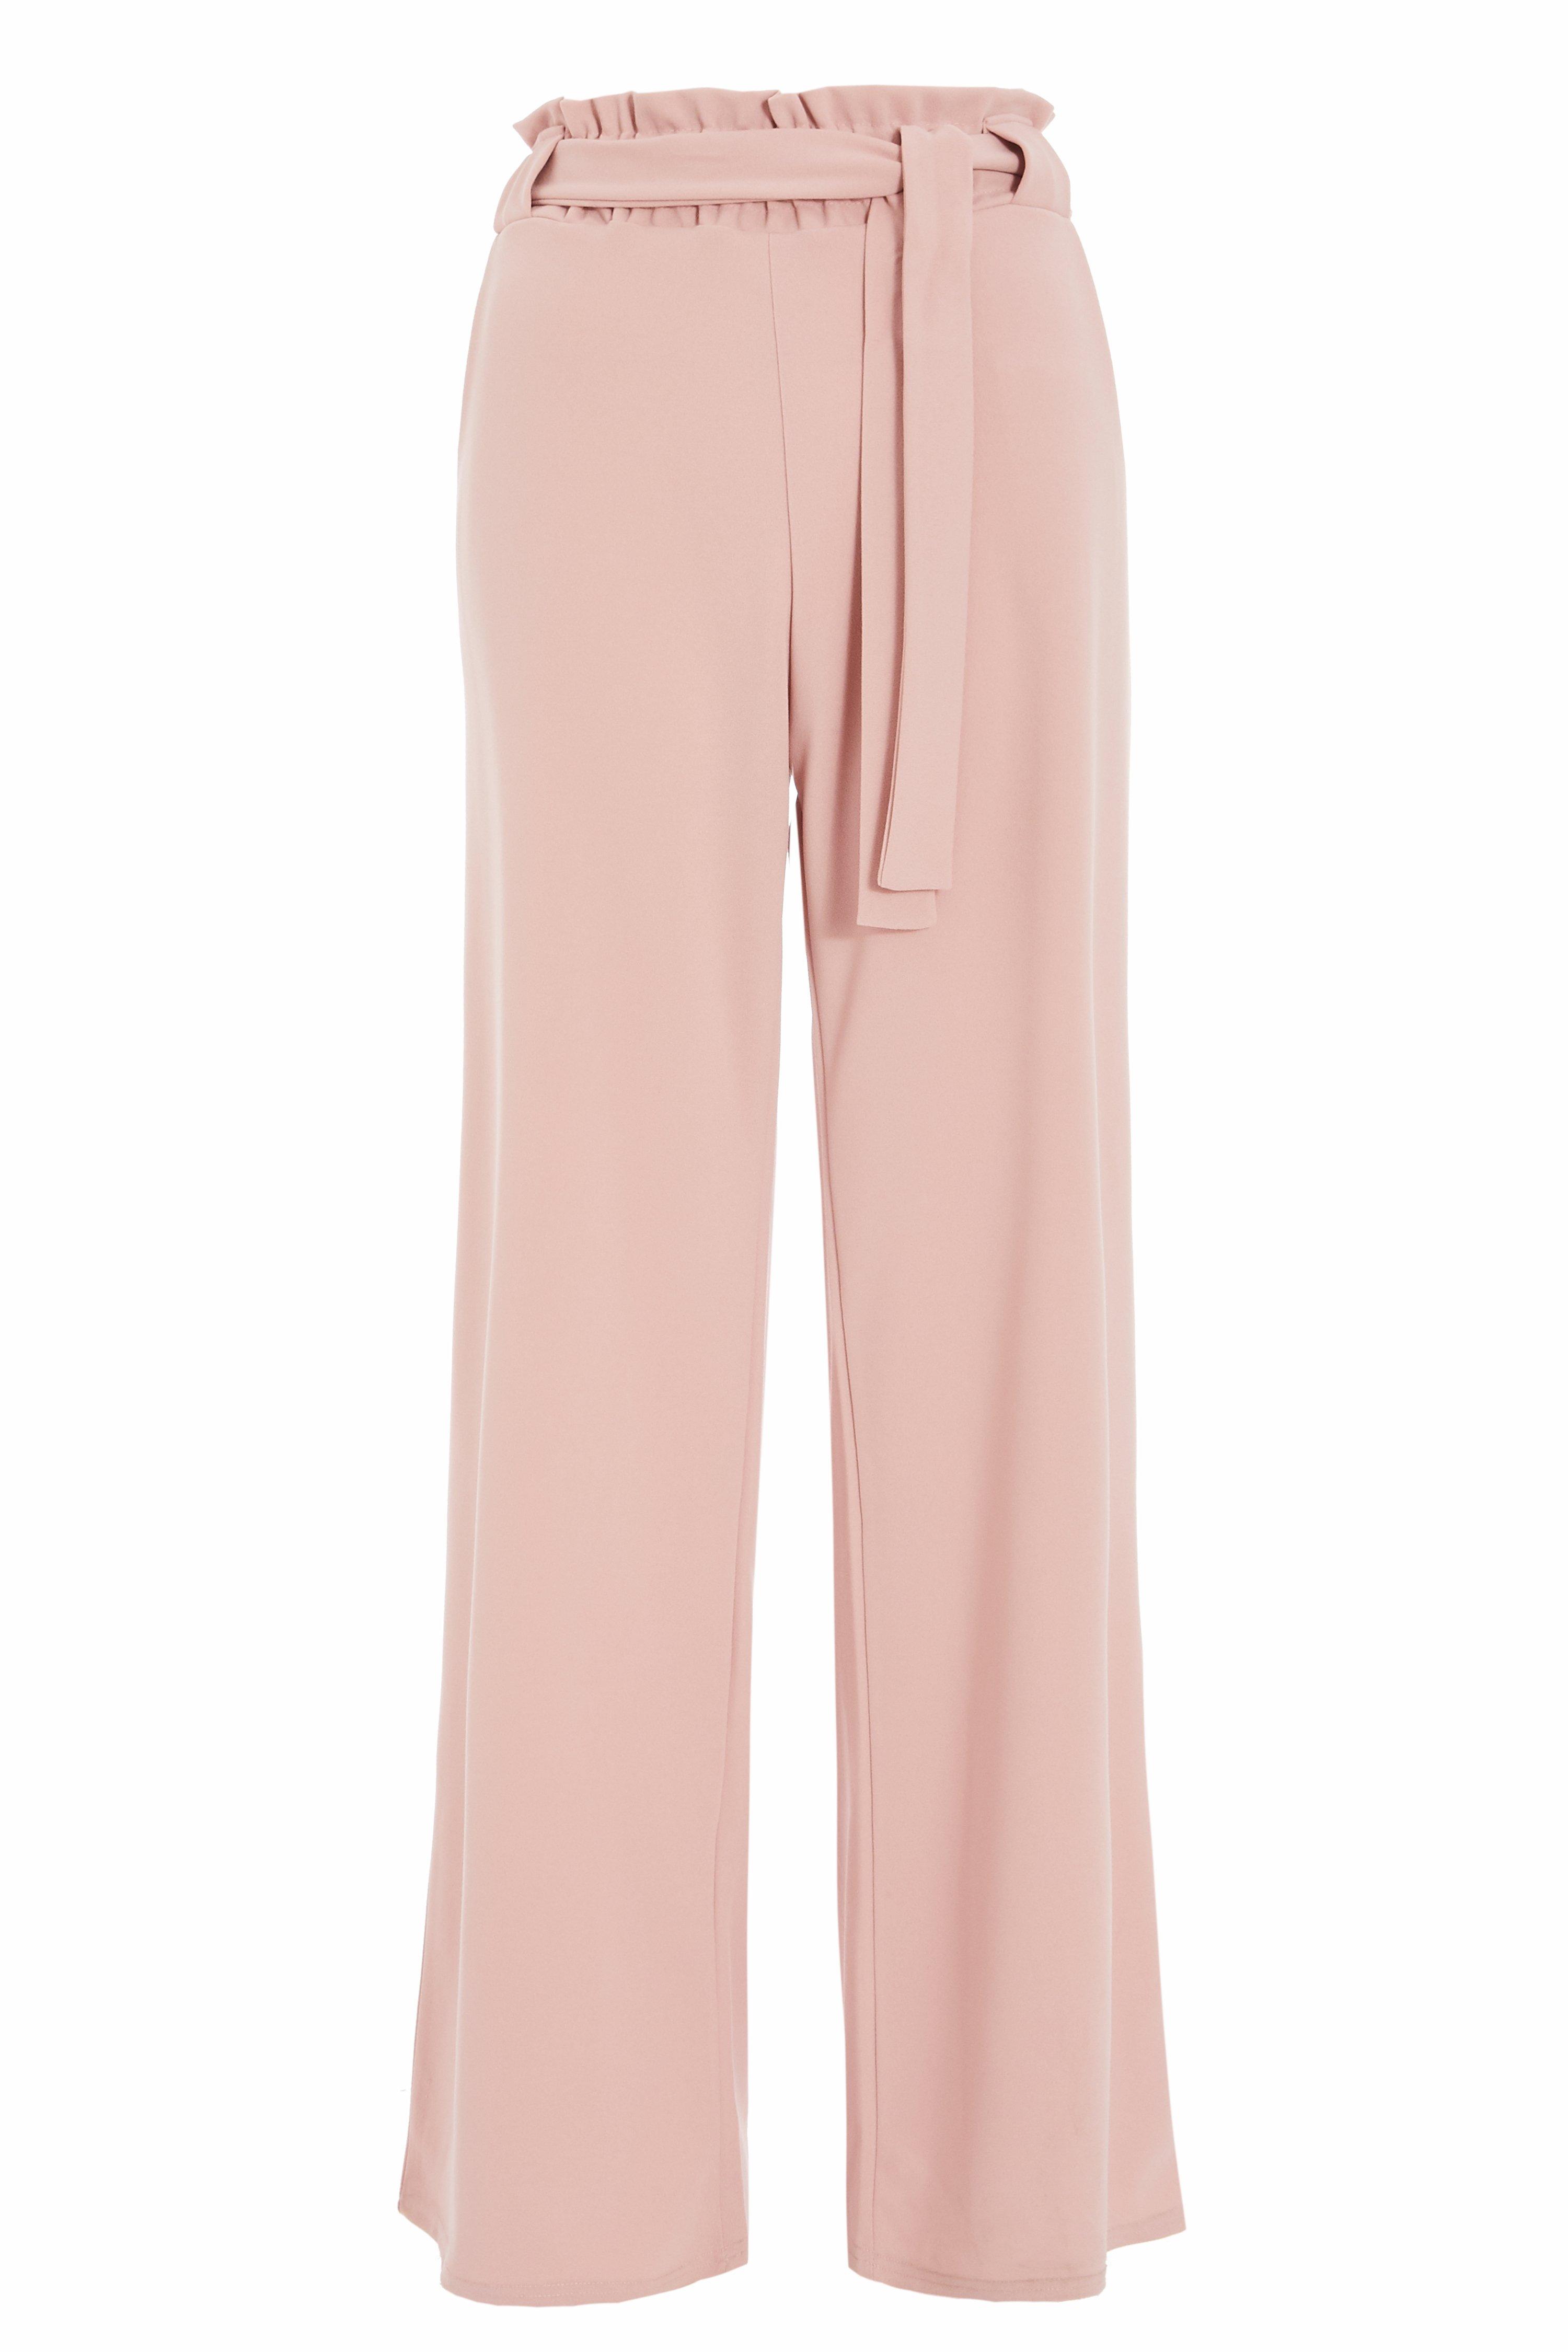 Pink Tie Belt Palazzo Trousers - Quiz Clothing